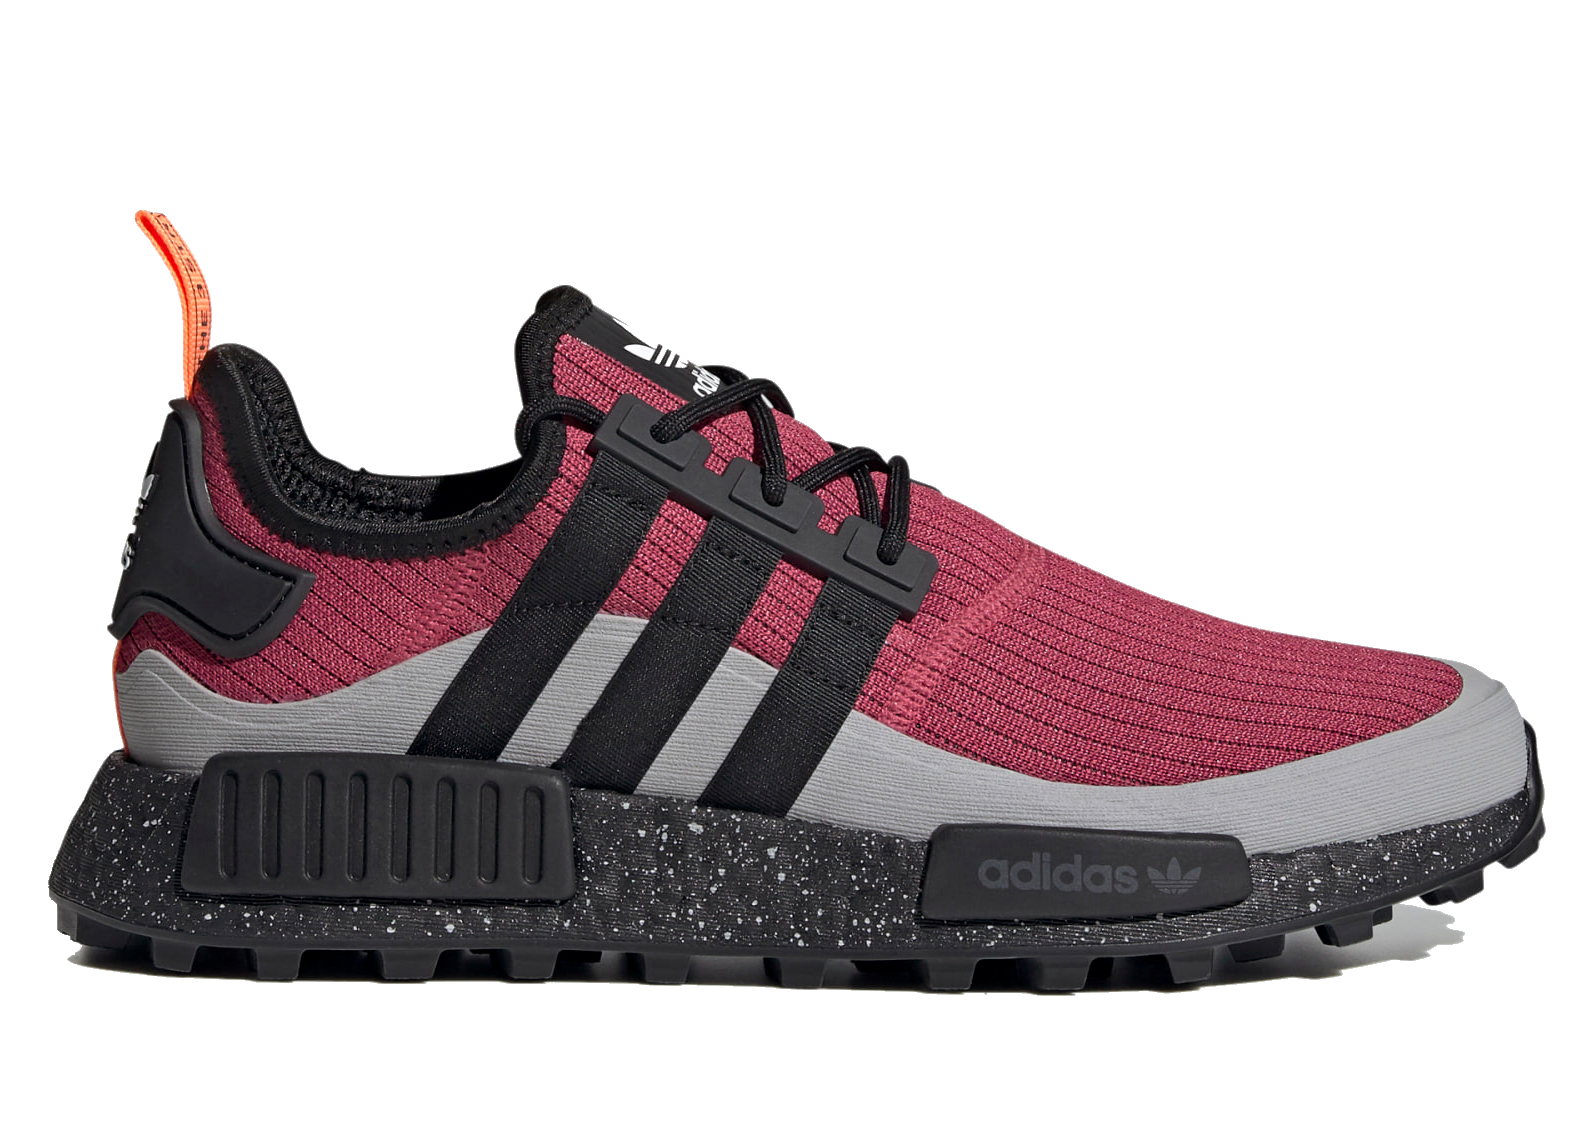 nmd r1 pink and black